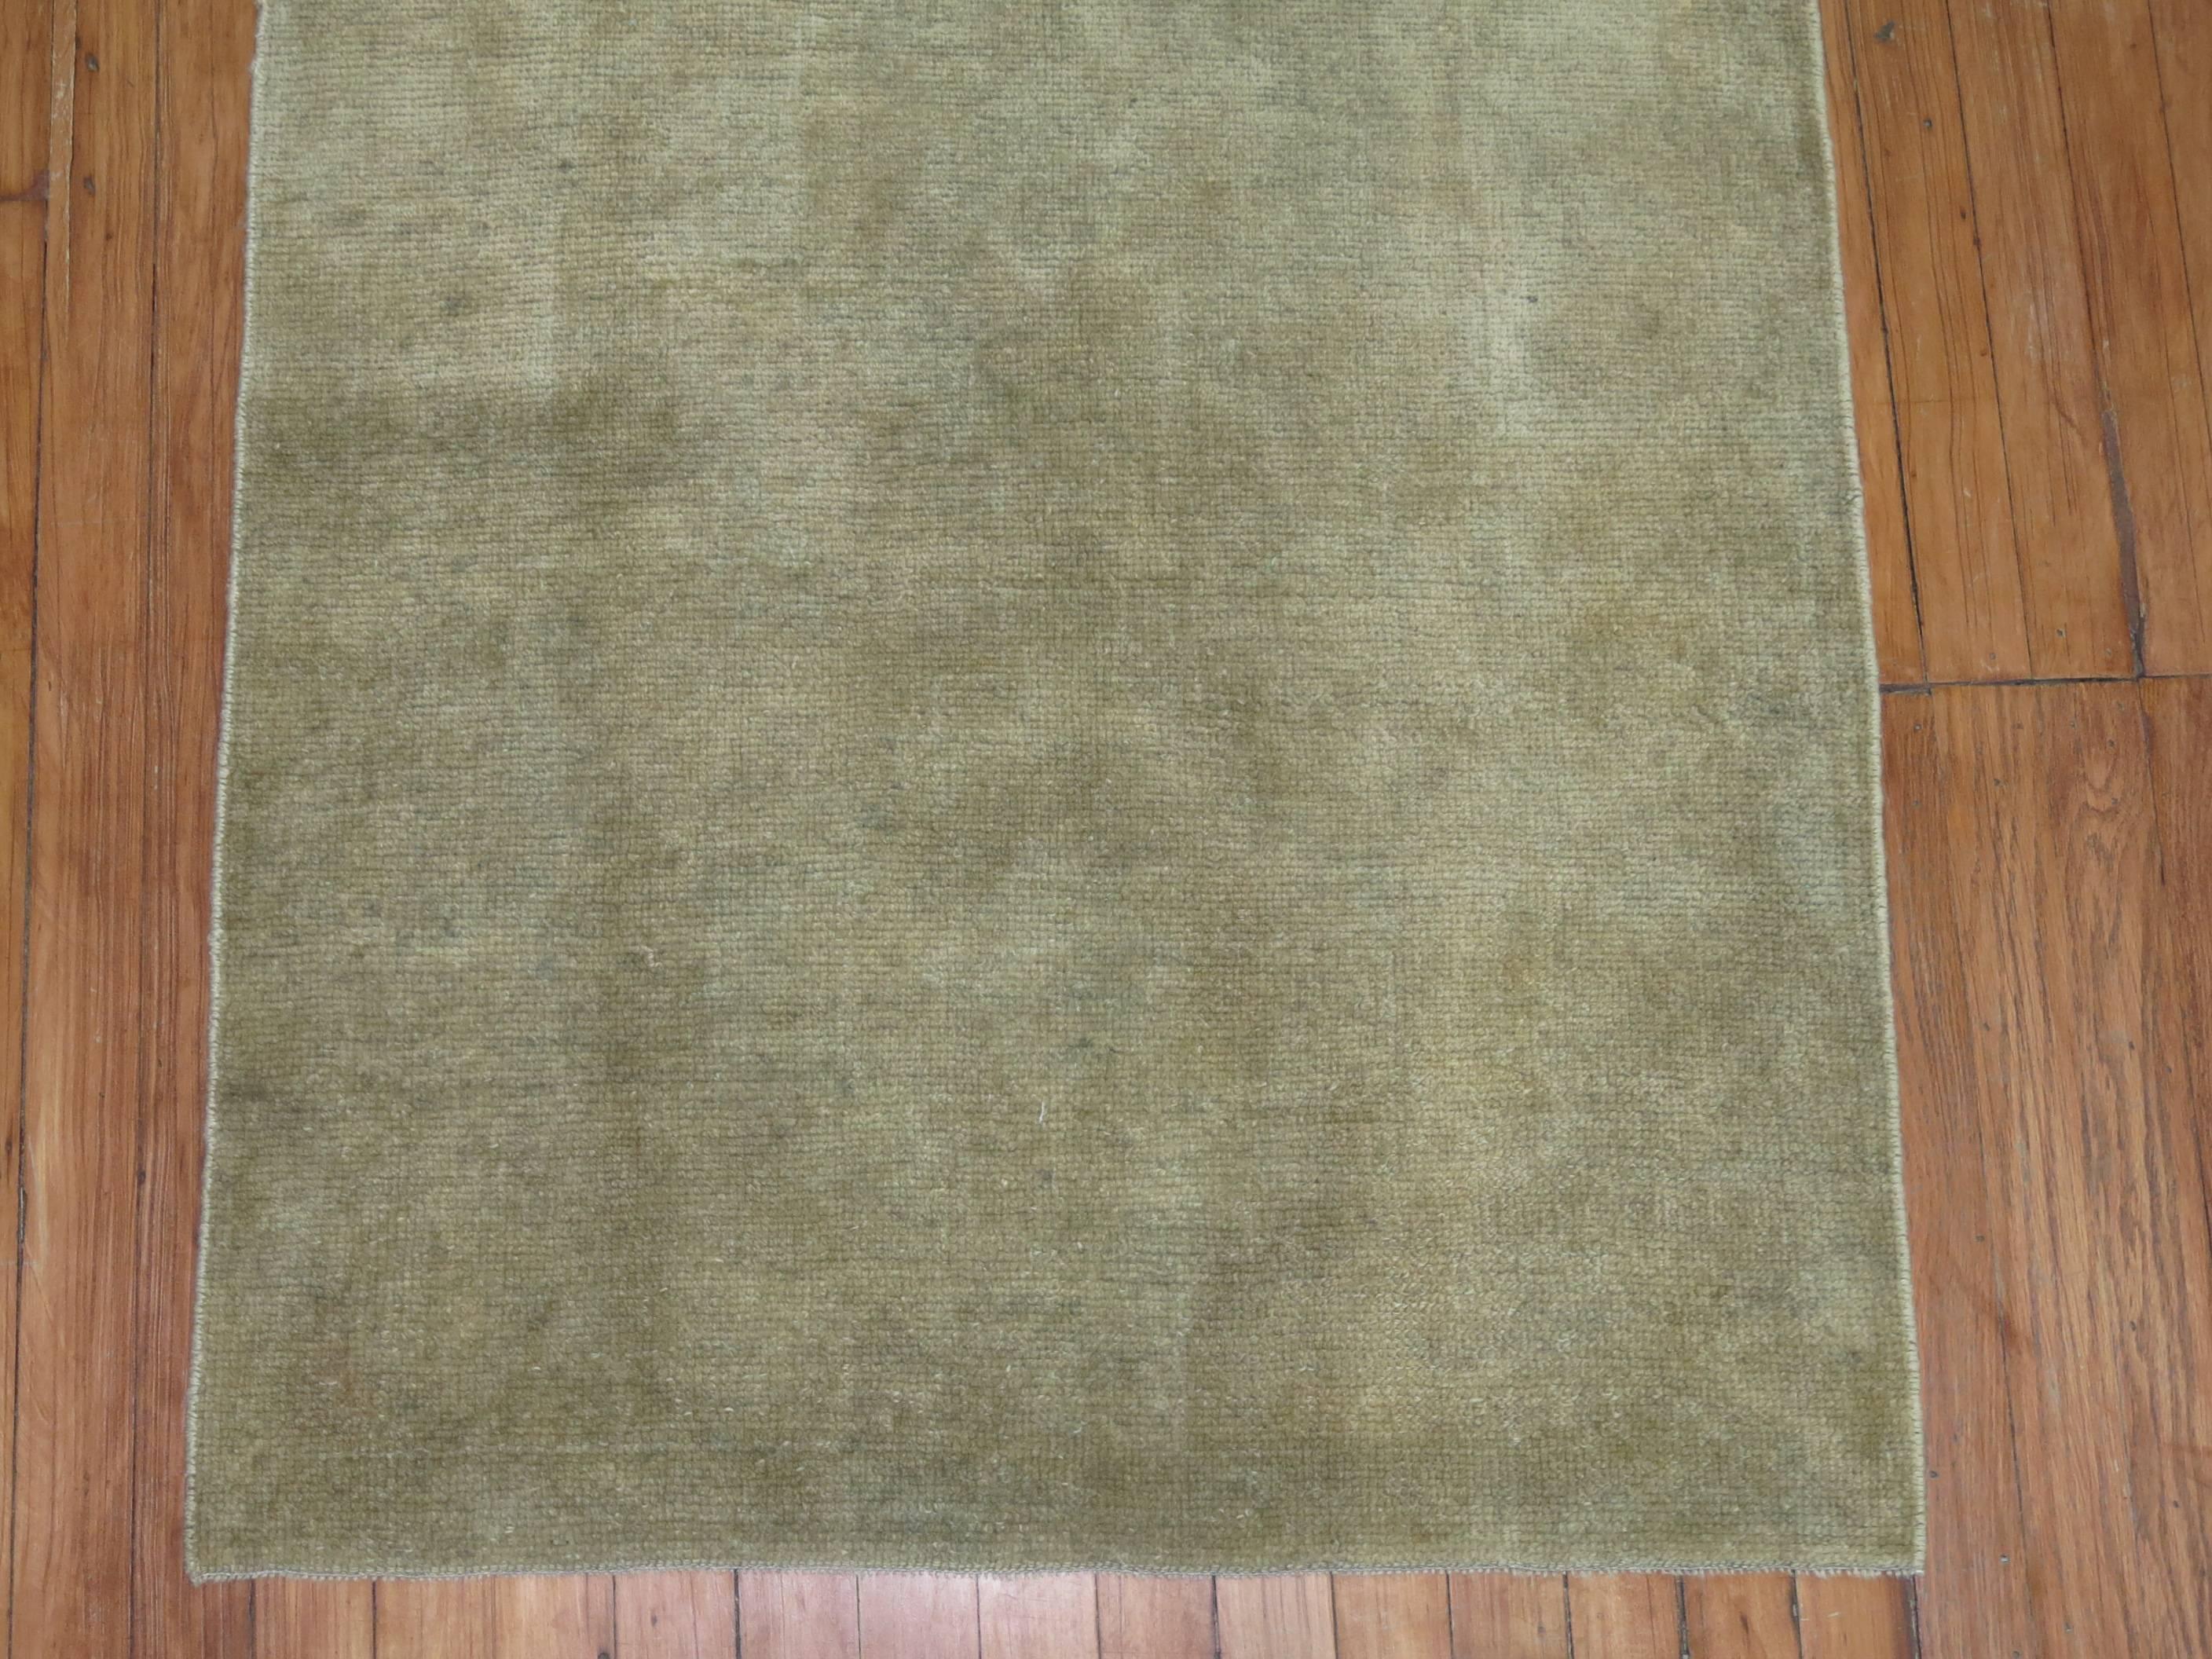 Monochromatic vintage Turkish Oushak rug in brown/taupe.